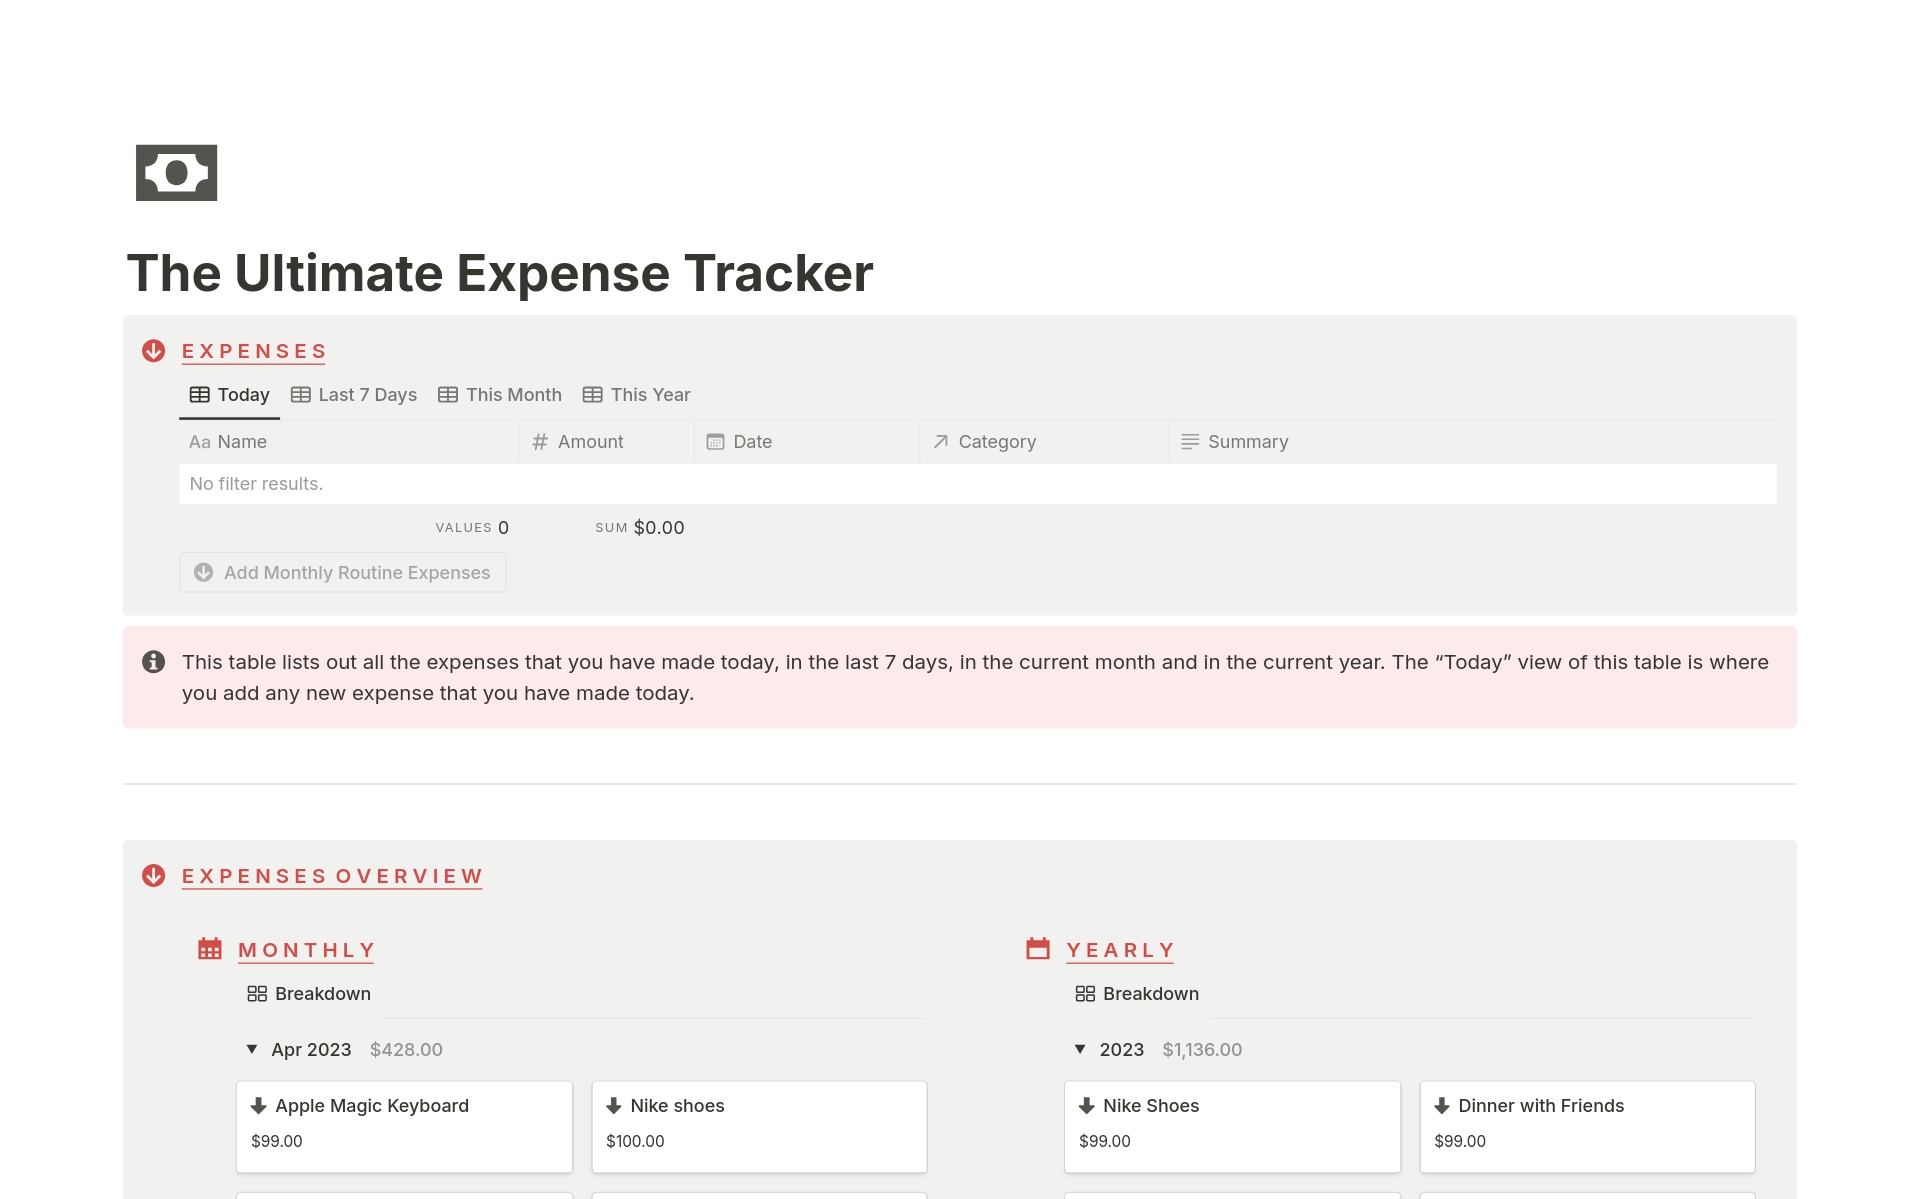 Track all your daily, monthly, and yearly expenses at one place.